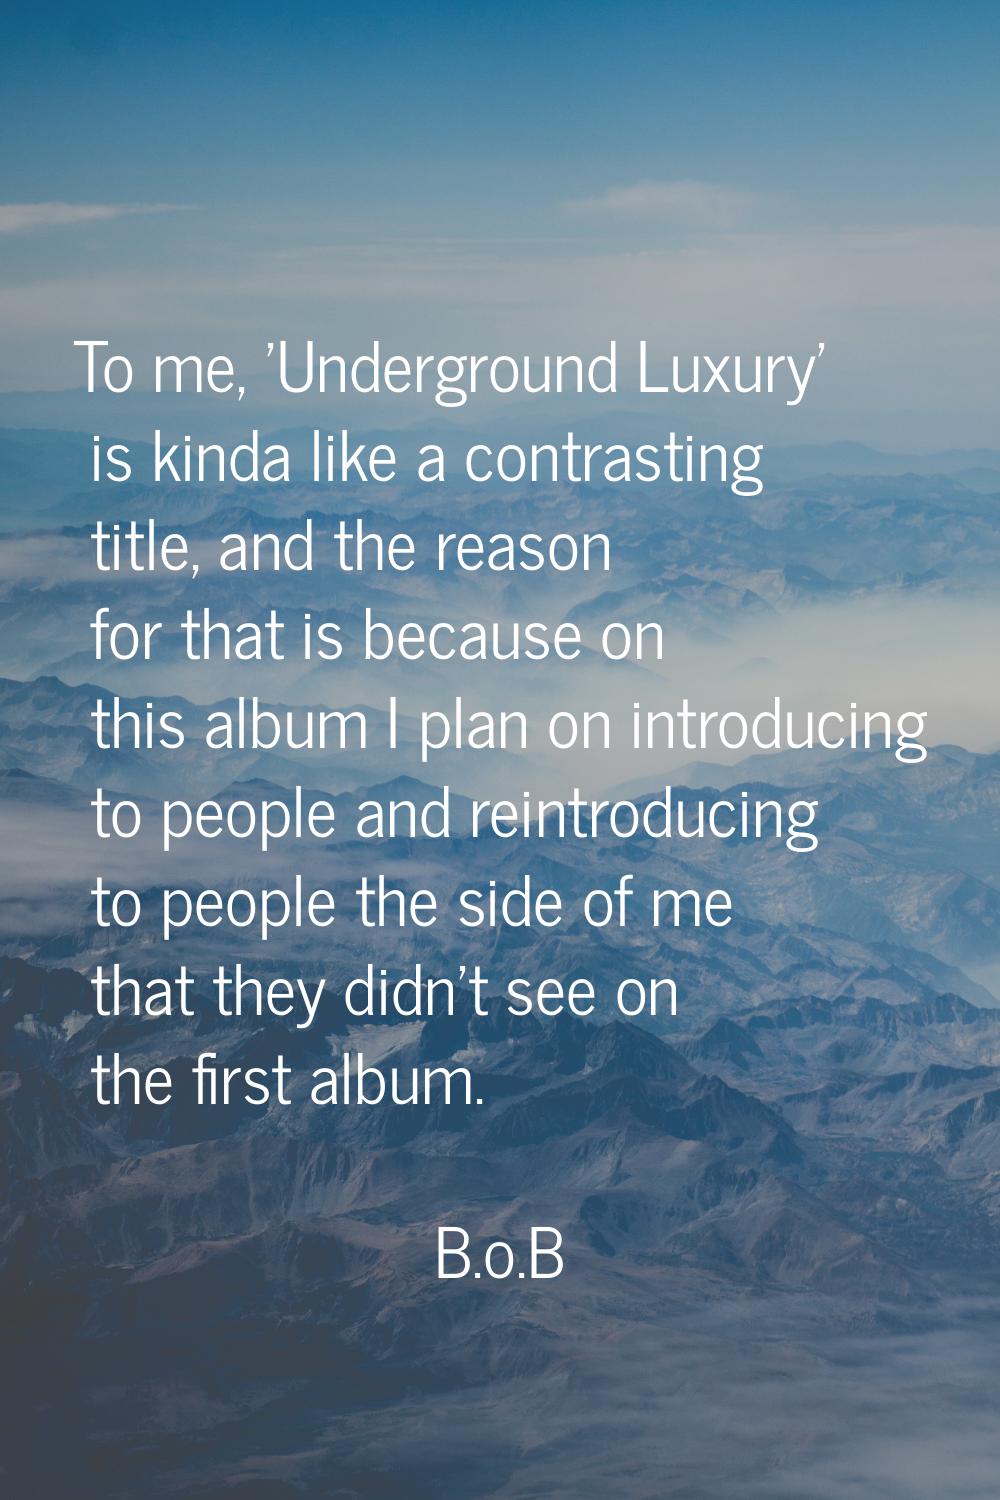 To me, 'Underground Luxury' is kinda like a contrasting title, and the reason for that is because o